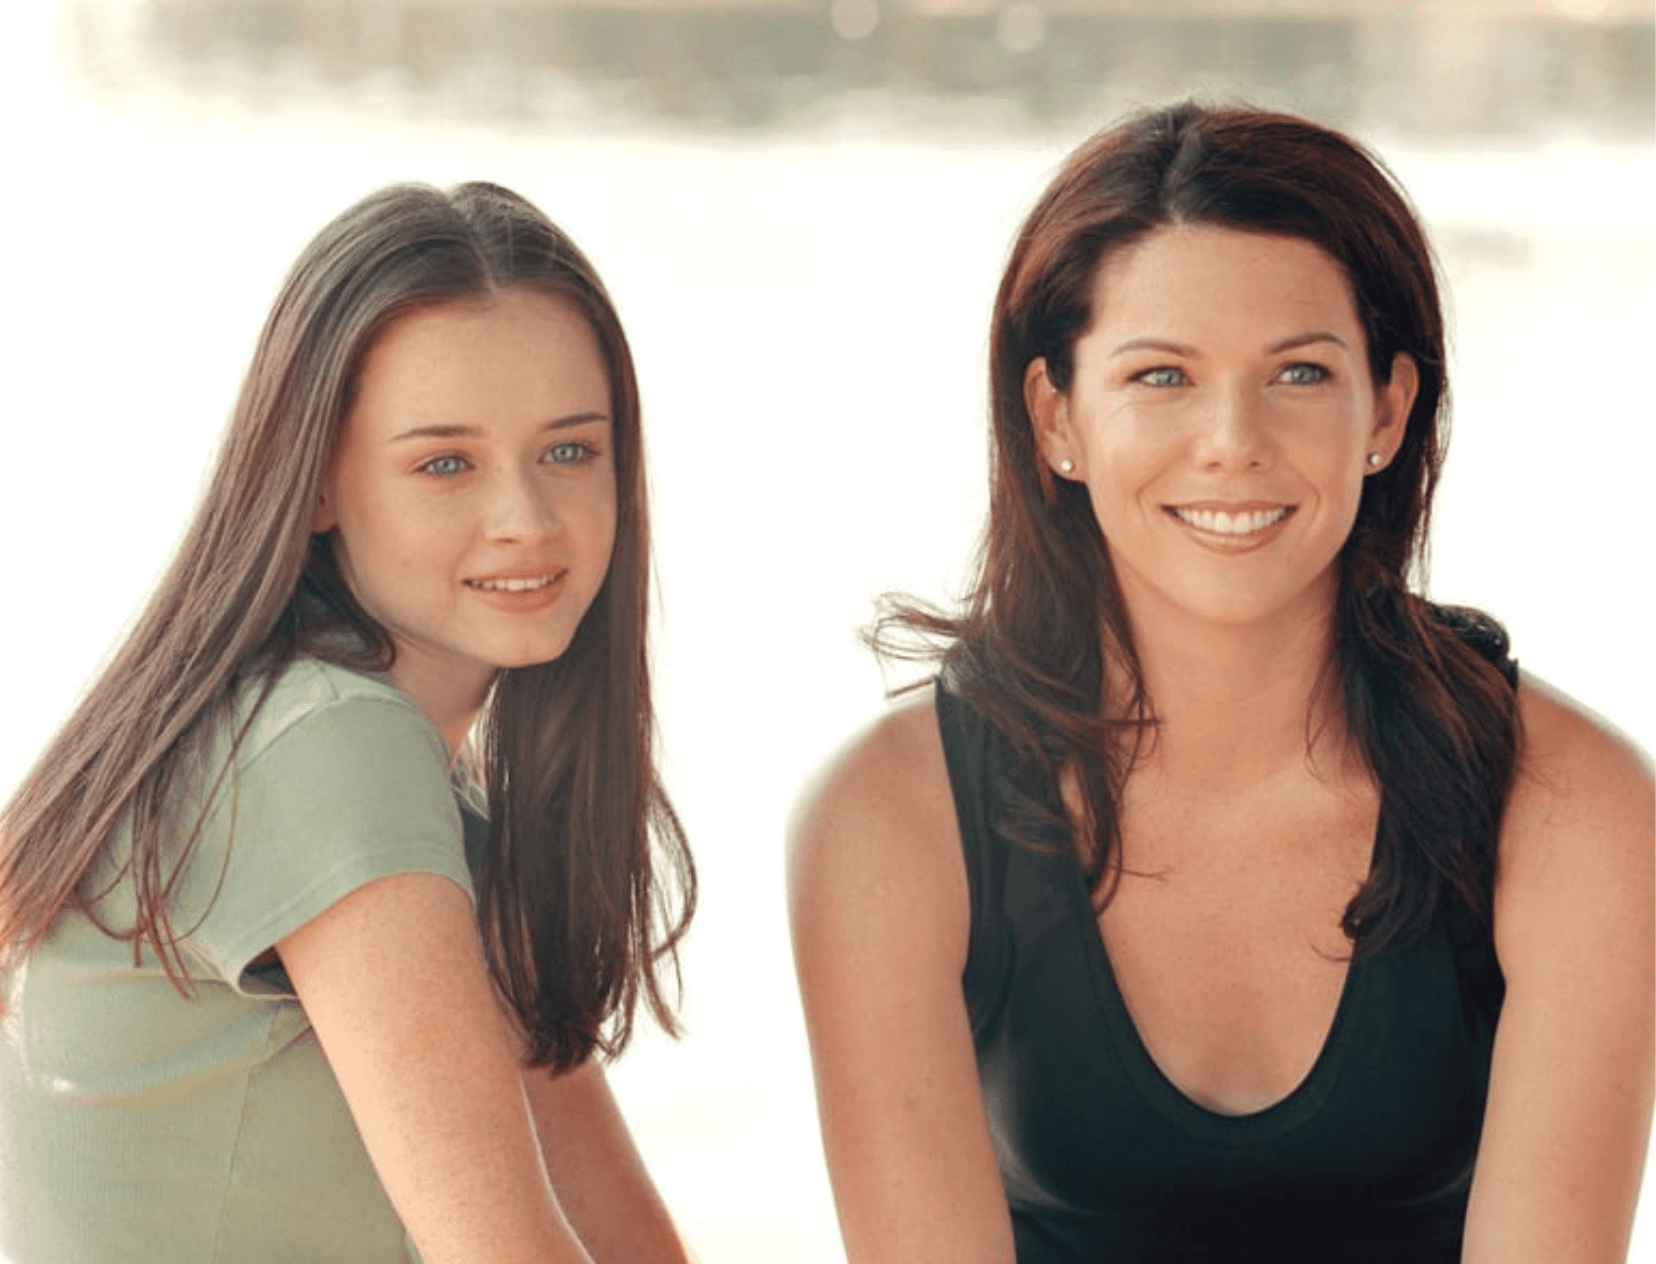 All The Lipsticks The Gilmore Girls Wore On The Show, Revealed By Their MUA